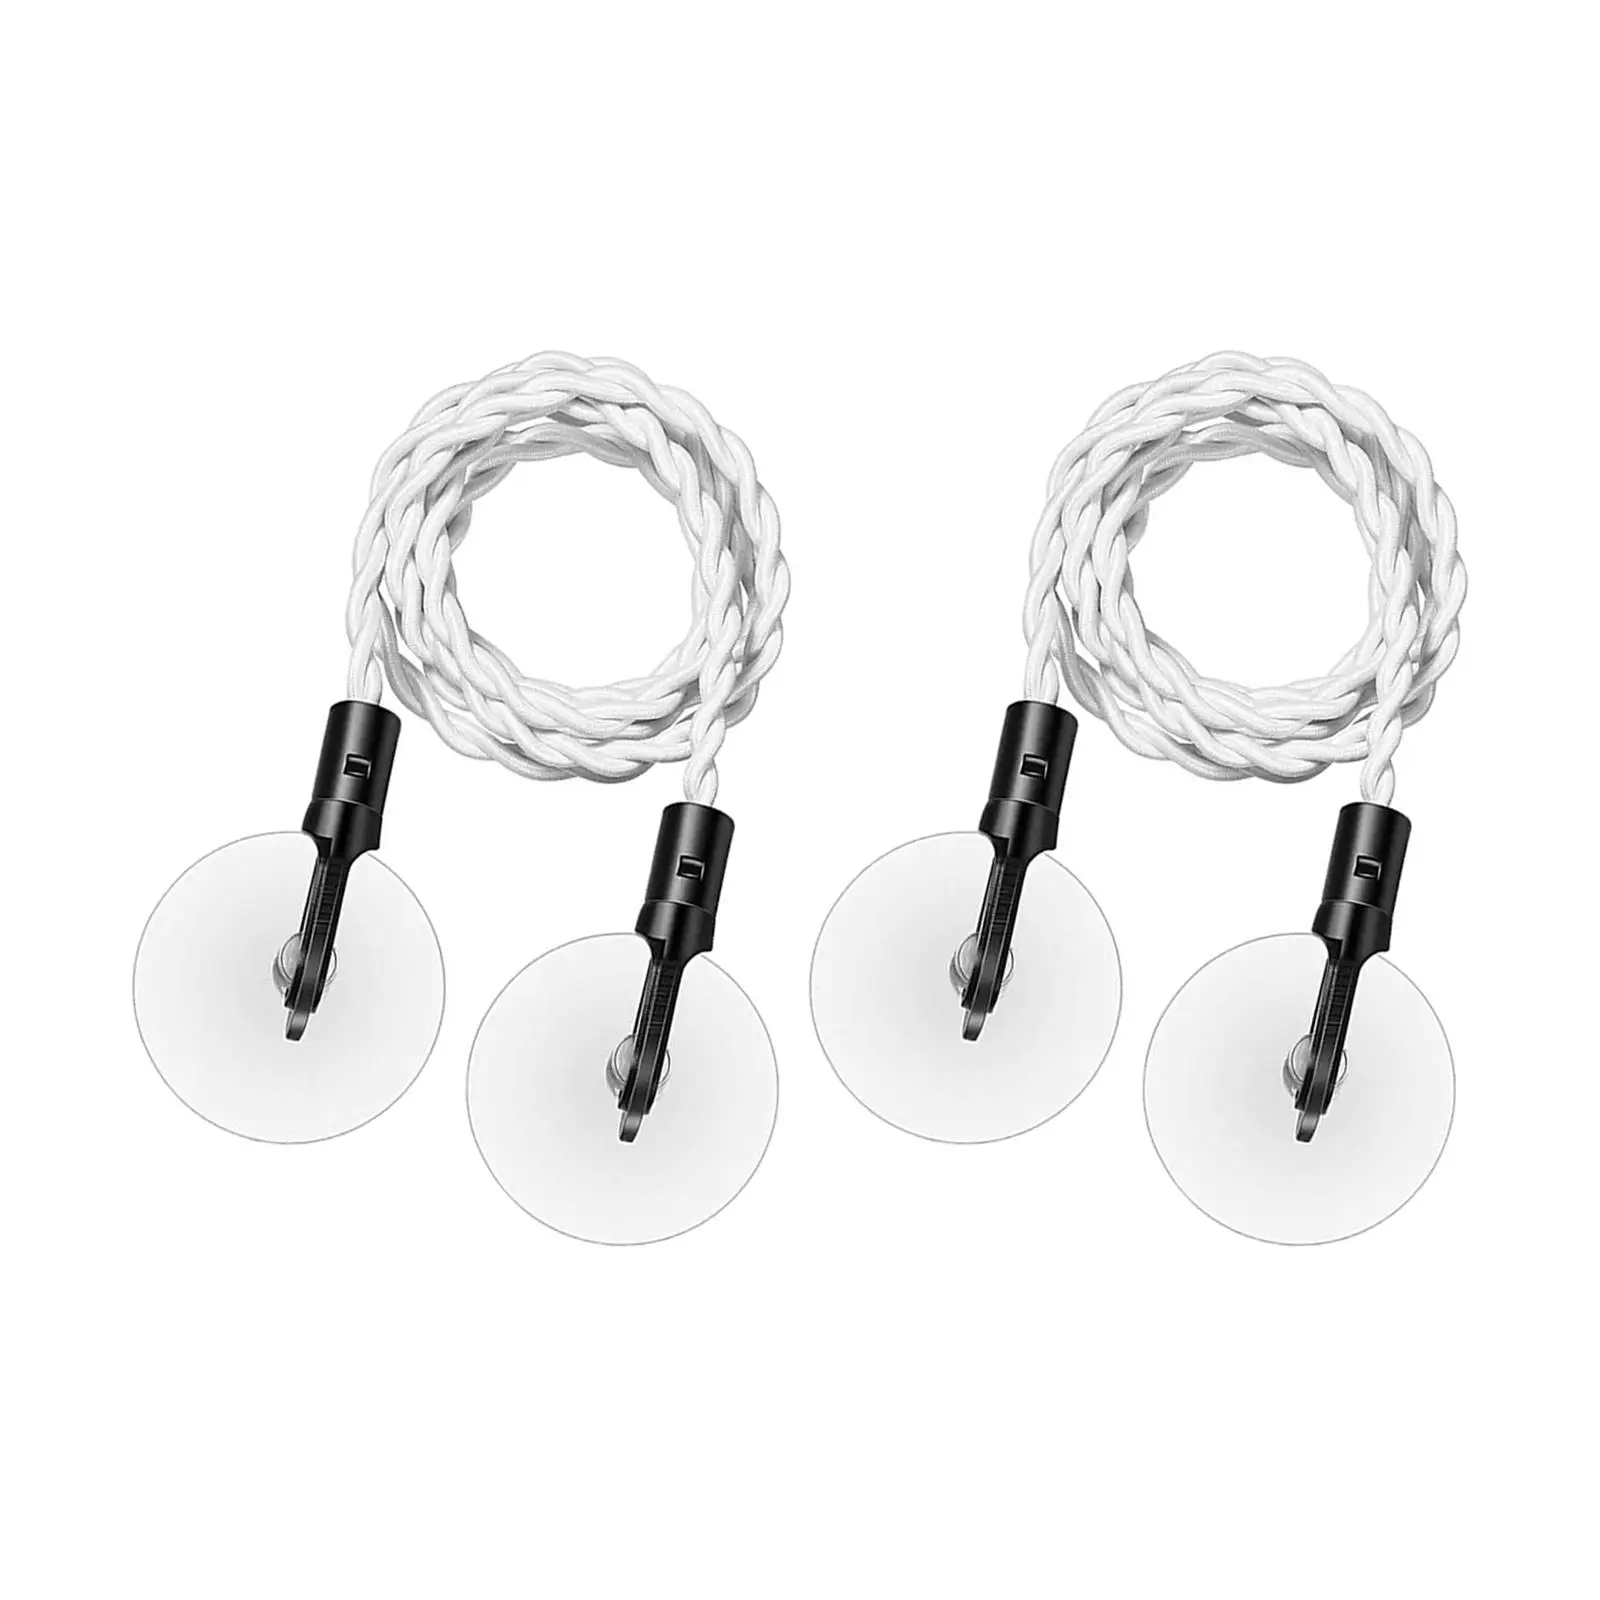 2Pcs Travel Clothesline with Hooks and Suction Cups Non Slip for Outdoor RV